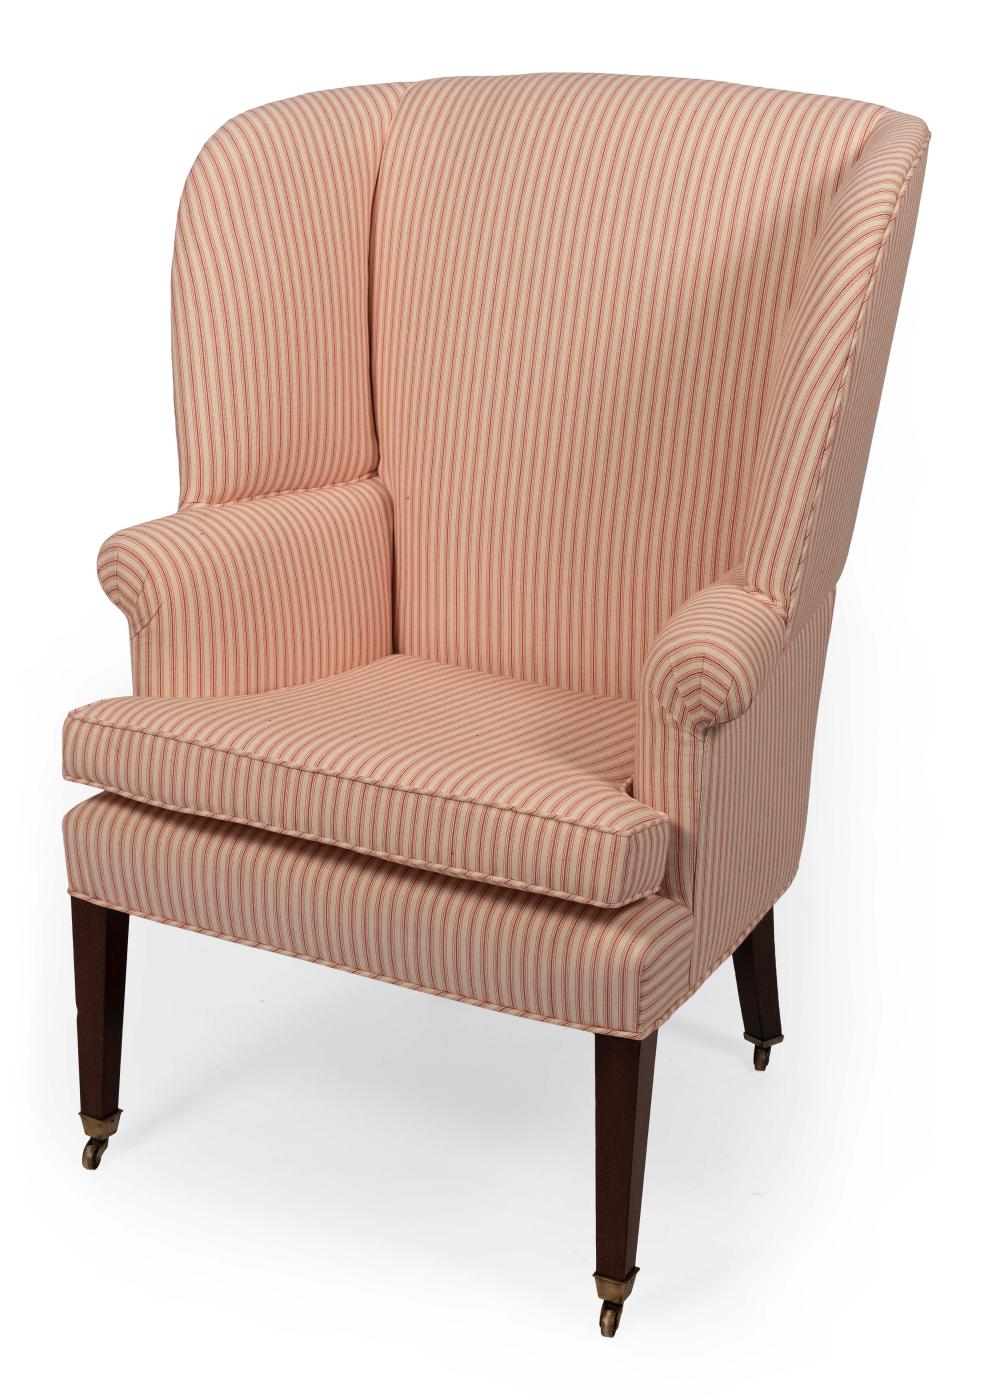 FEDERAL STYLE WING CHAIR EARLY 350428